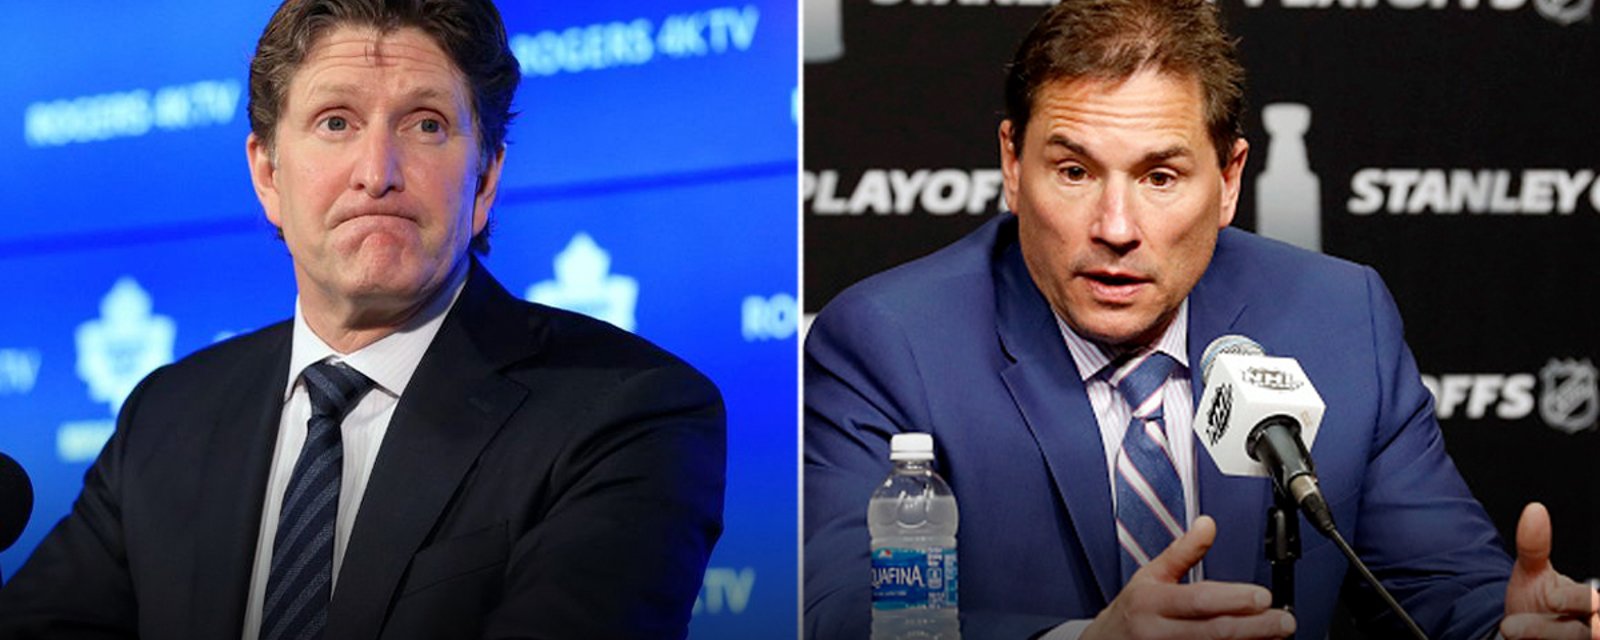 ICYMI: Bruins file official complaint with the league about Leafs’ tactics ahead of Game 7